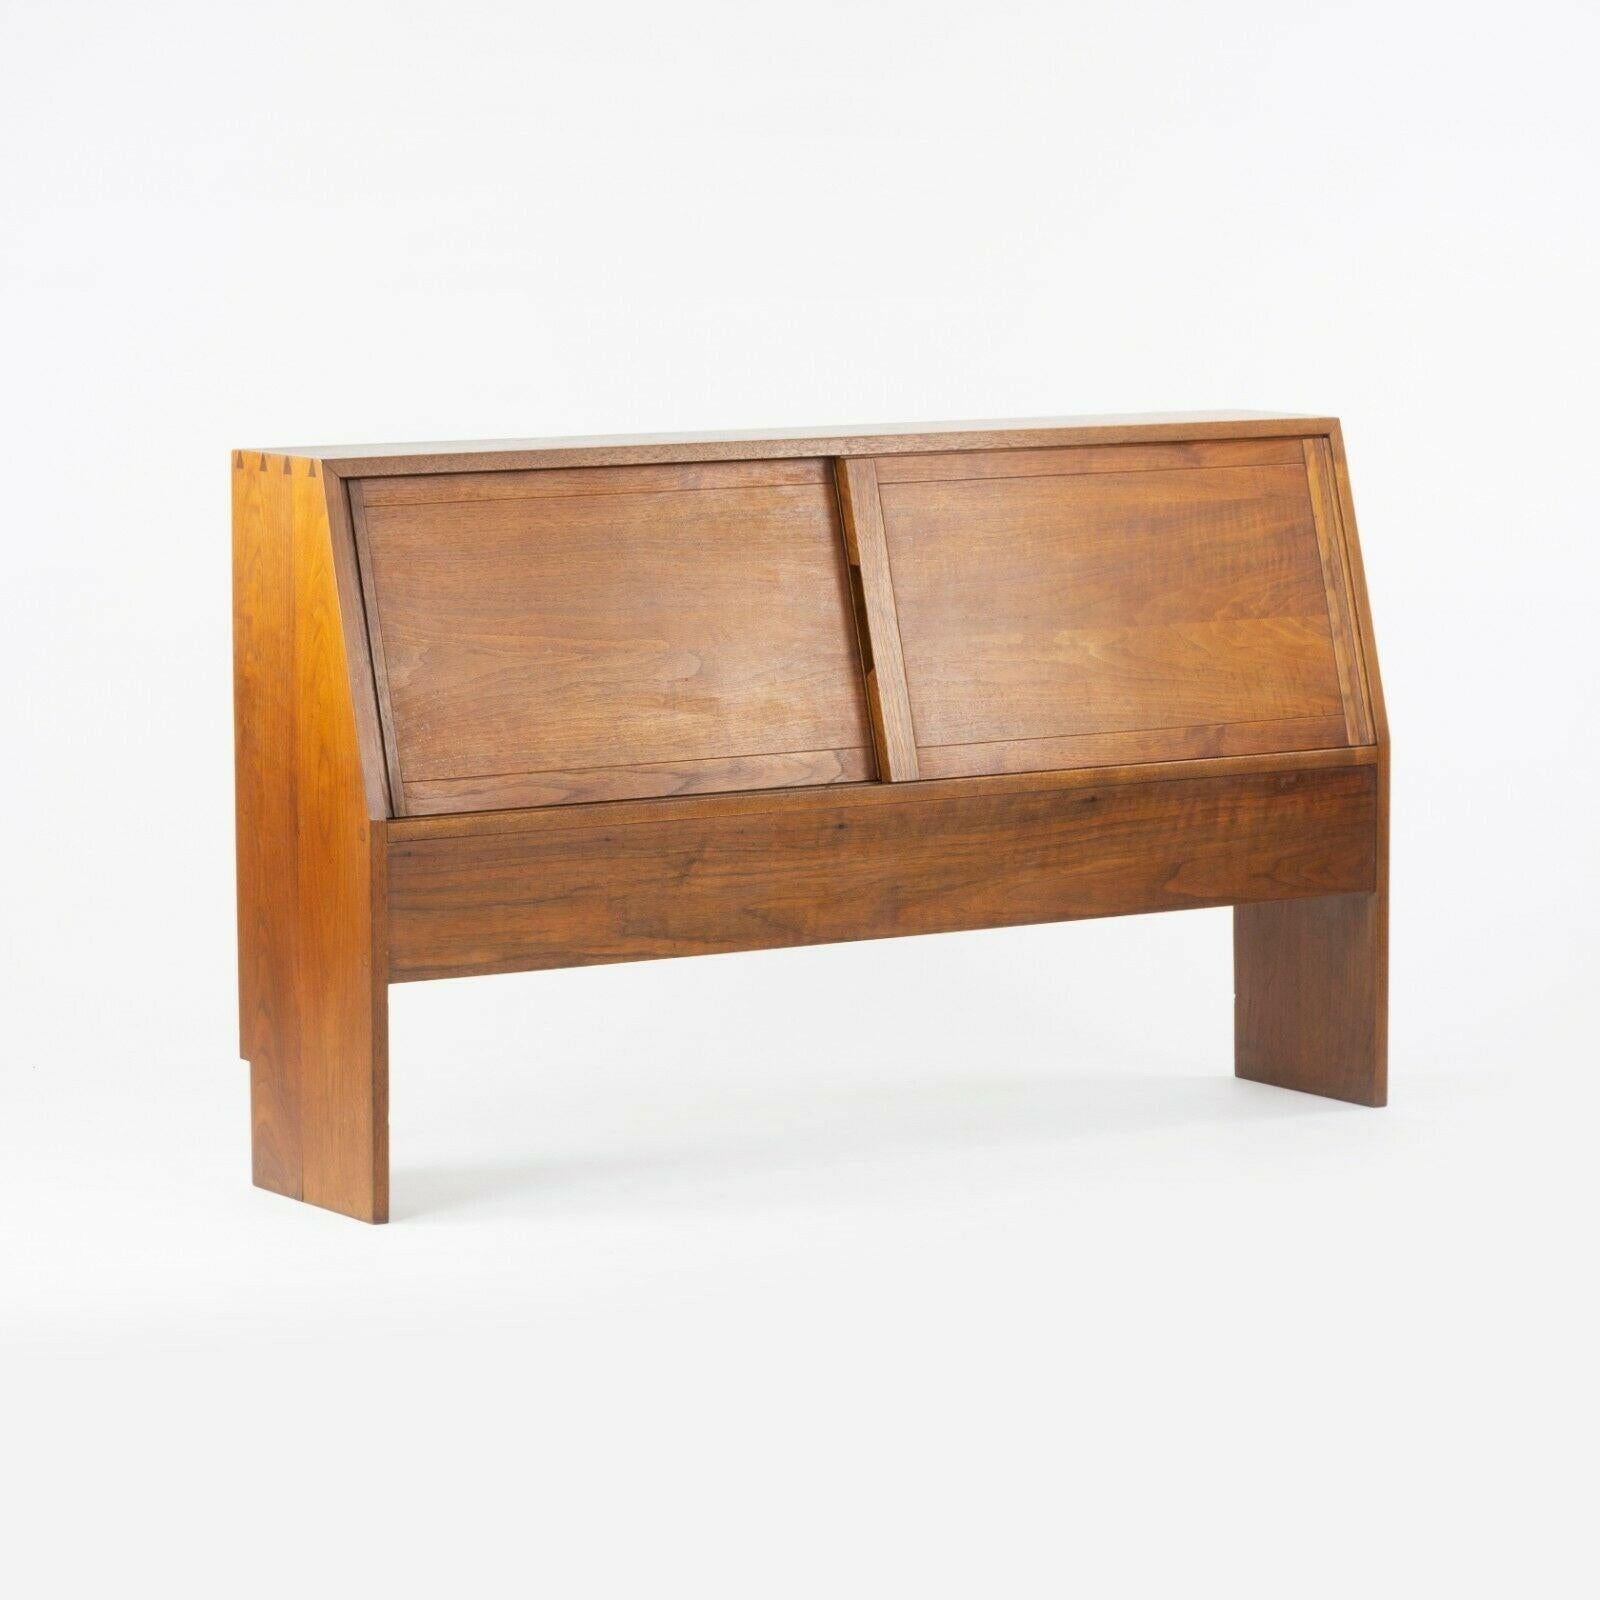 1950s George Nakashima Studio Full Size Dovetailed Walnut Headboard Bed Cabinet In Good Condition For Sale In Philadelphia, PA